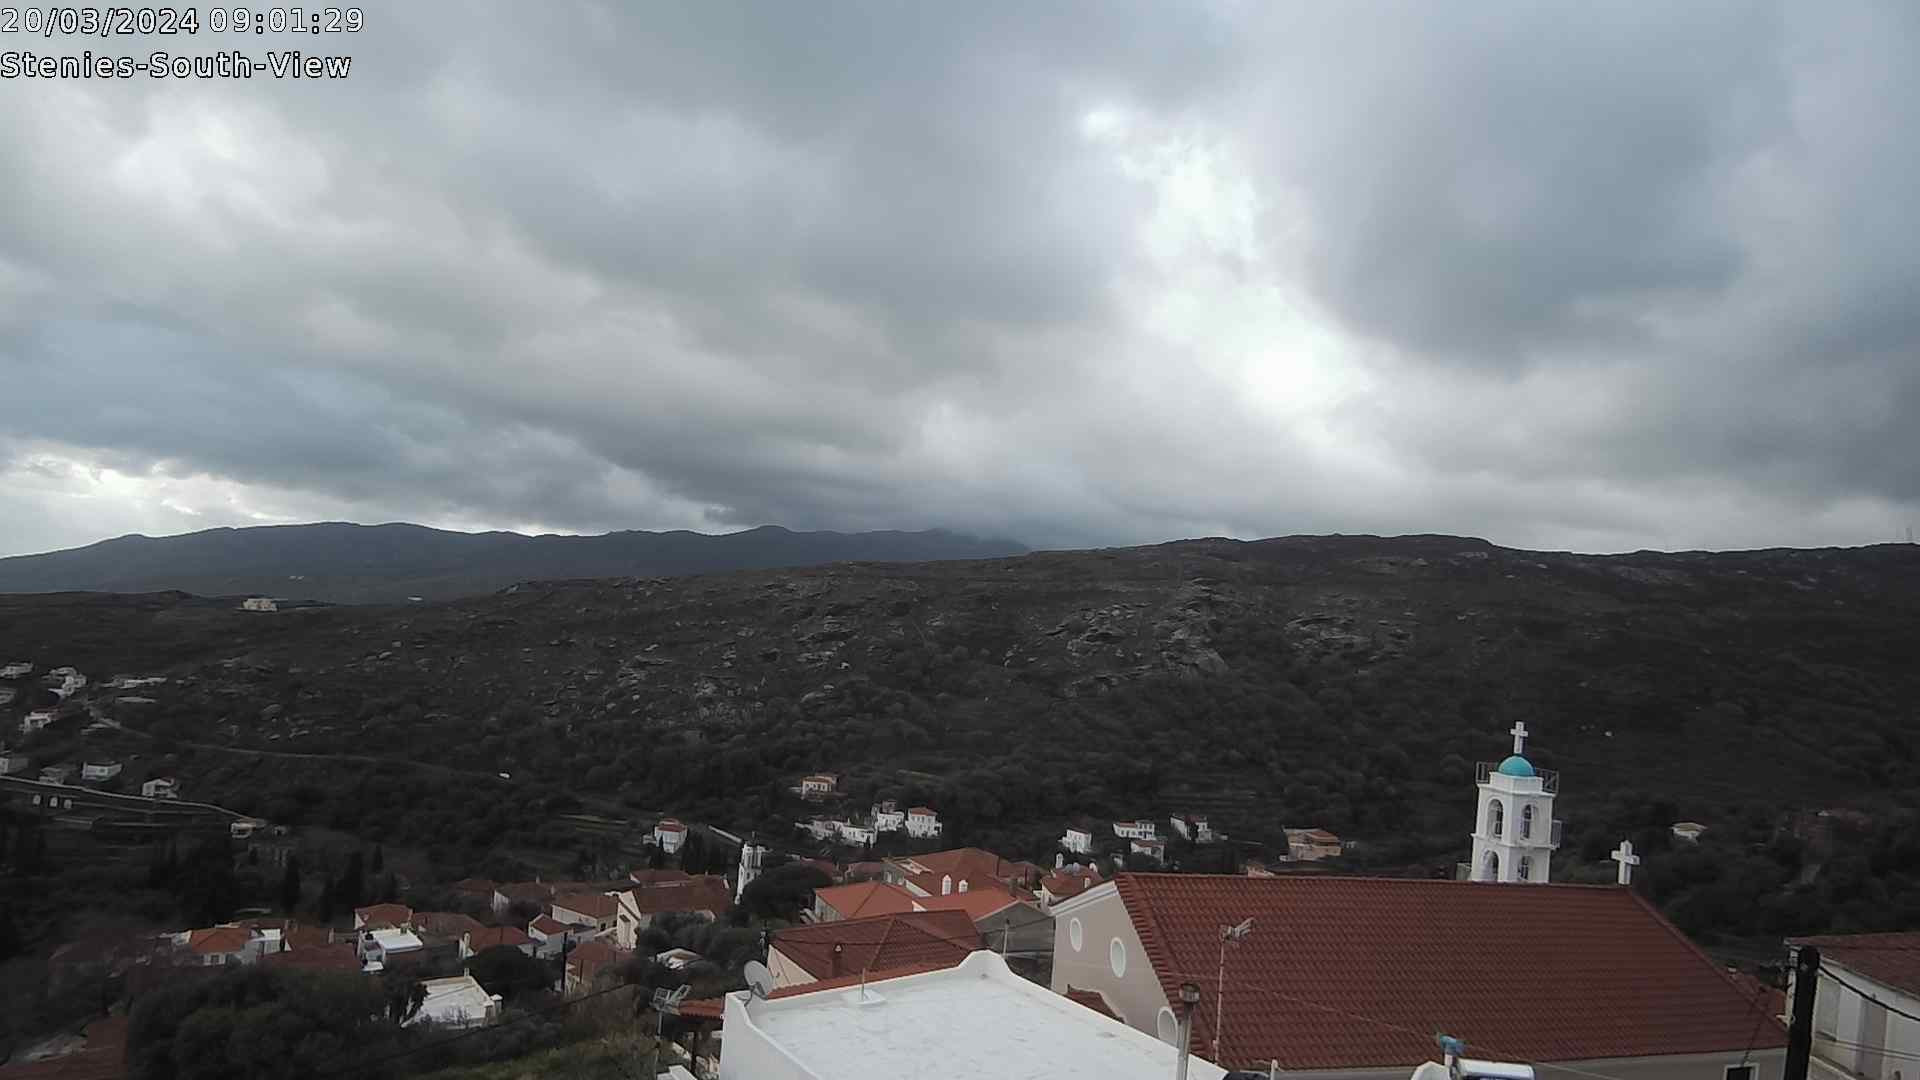 time-lapse frame, Stenies. Andros Island  South View webcam